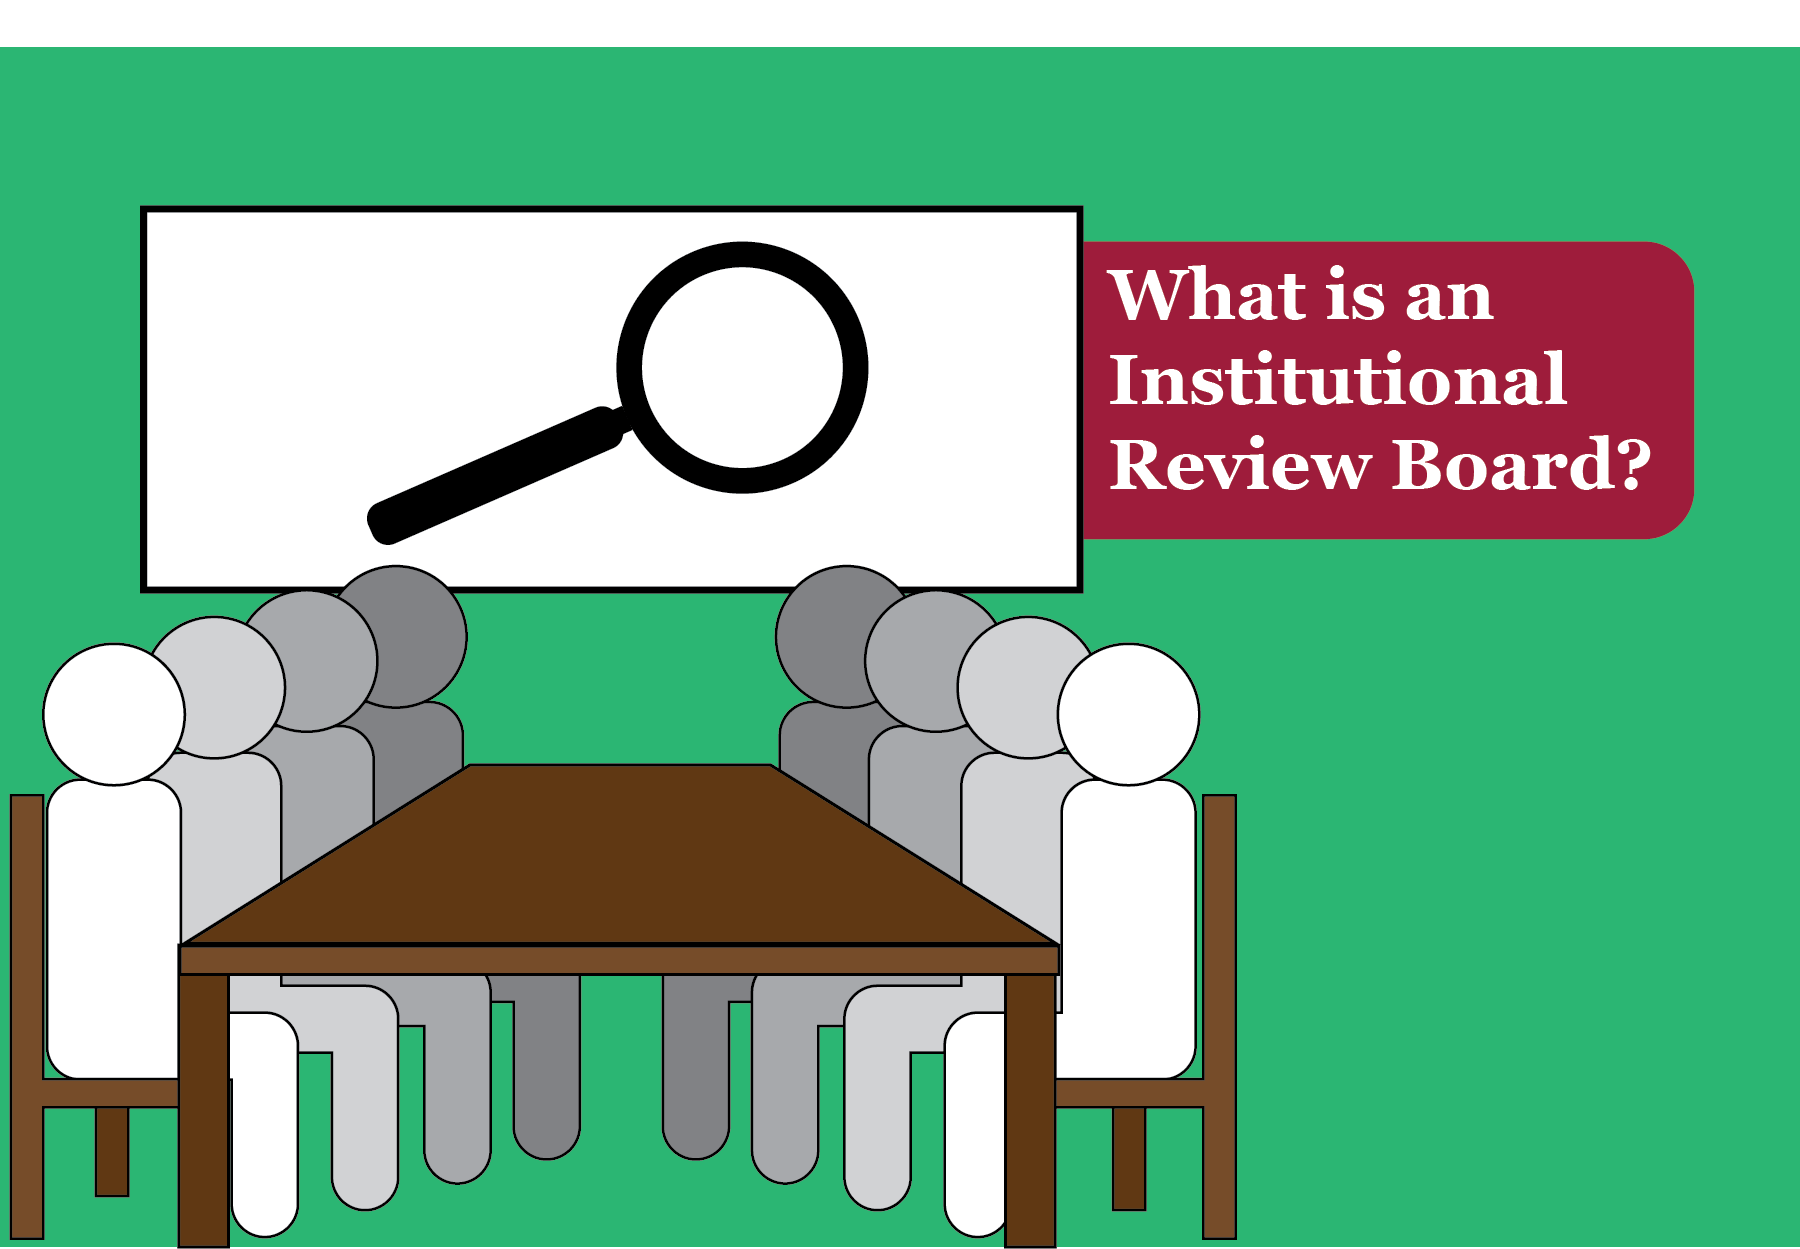 What is an Institutional Review Board?